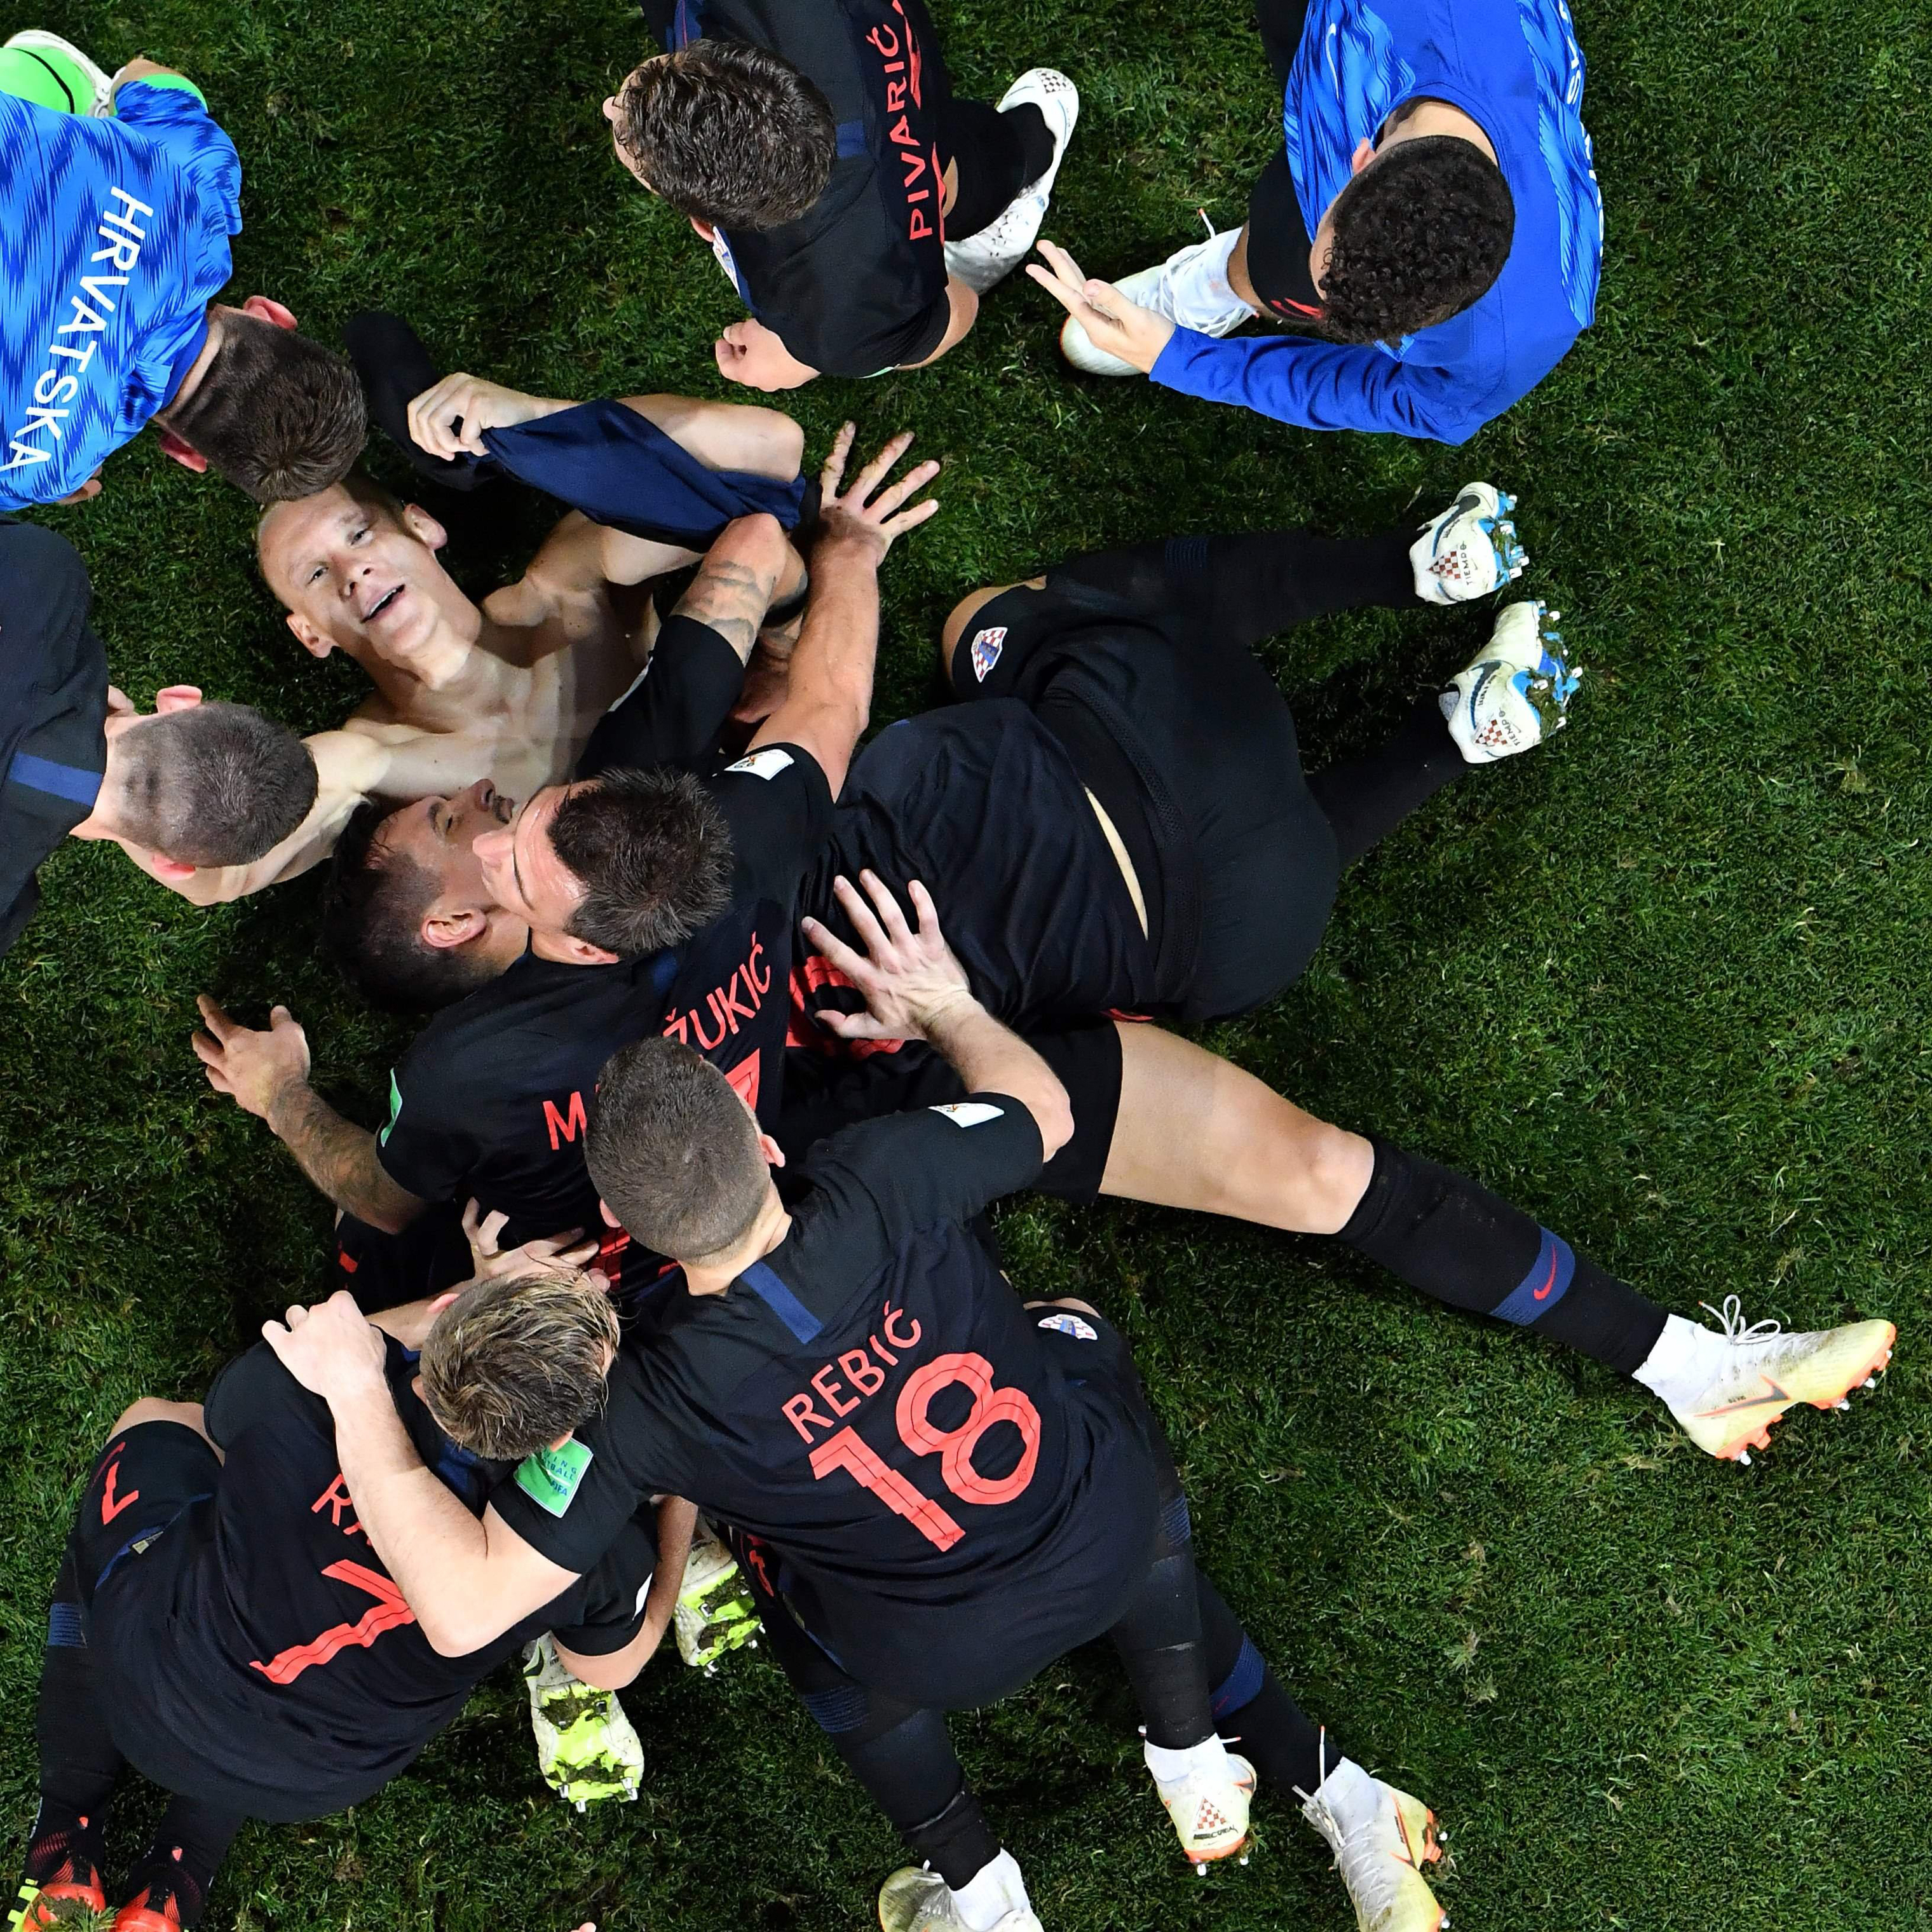 Croatia's defender Domagoj Vida (down) is congratulated by teammates after scoring a goal during the quarter final game between Russia and Croatia on July 7, 2018. (Antonin Thullier—AFP/Getty Images)